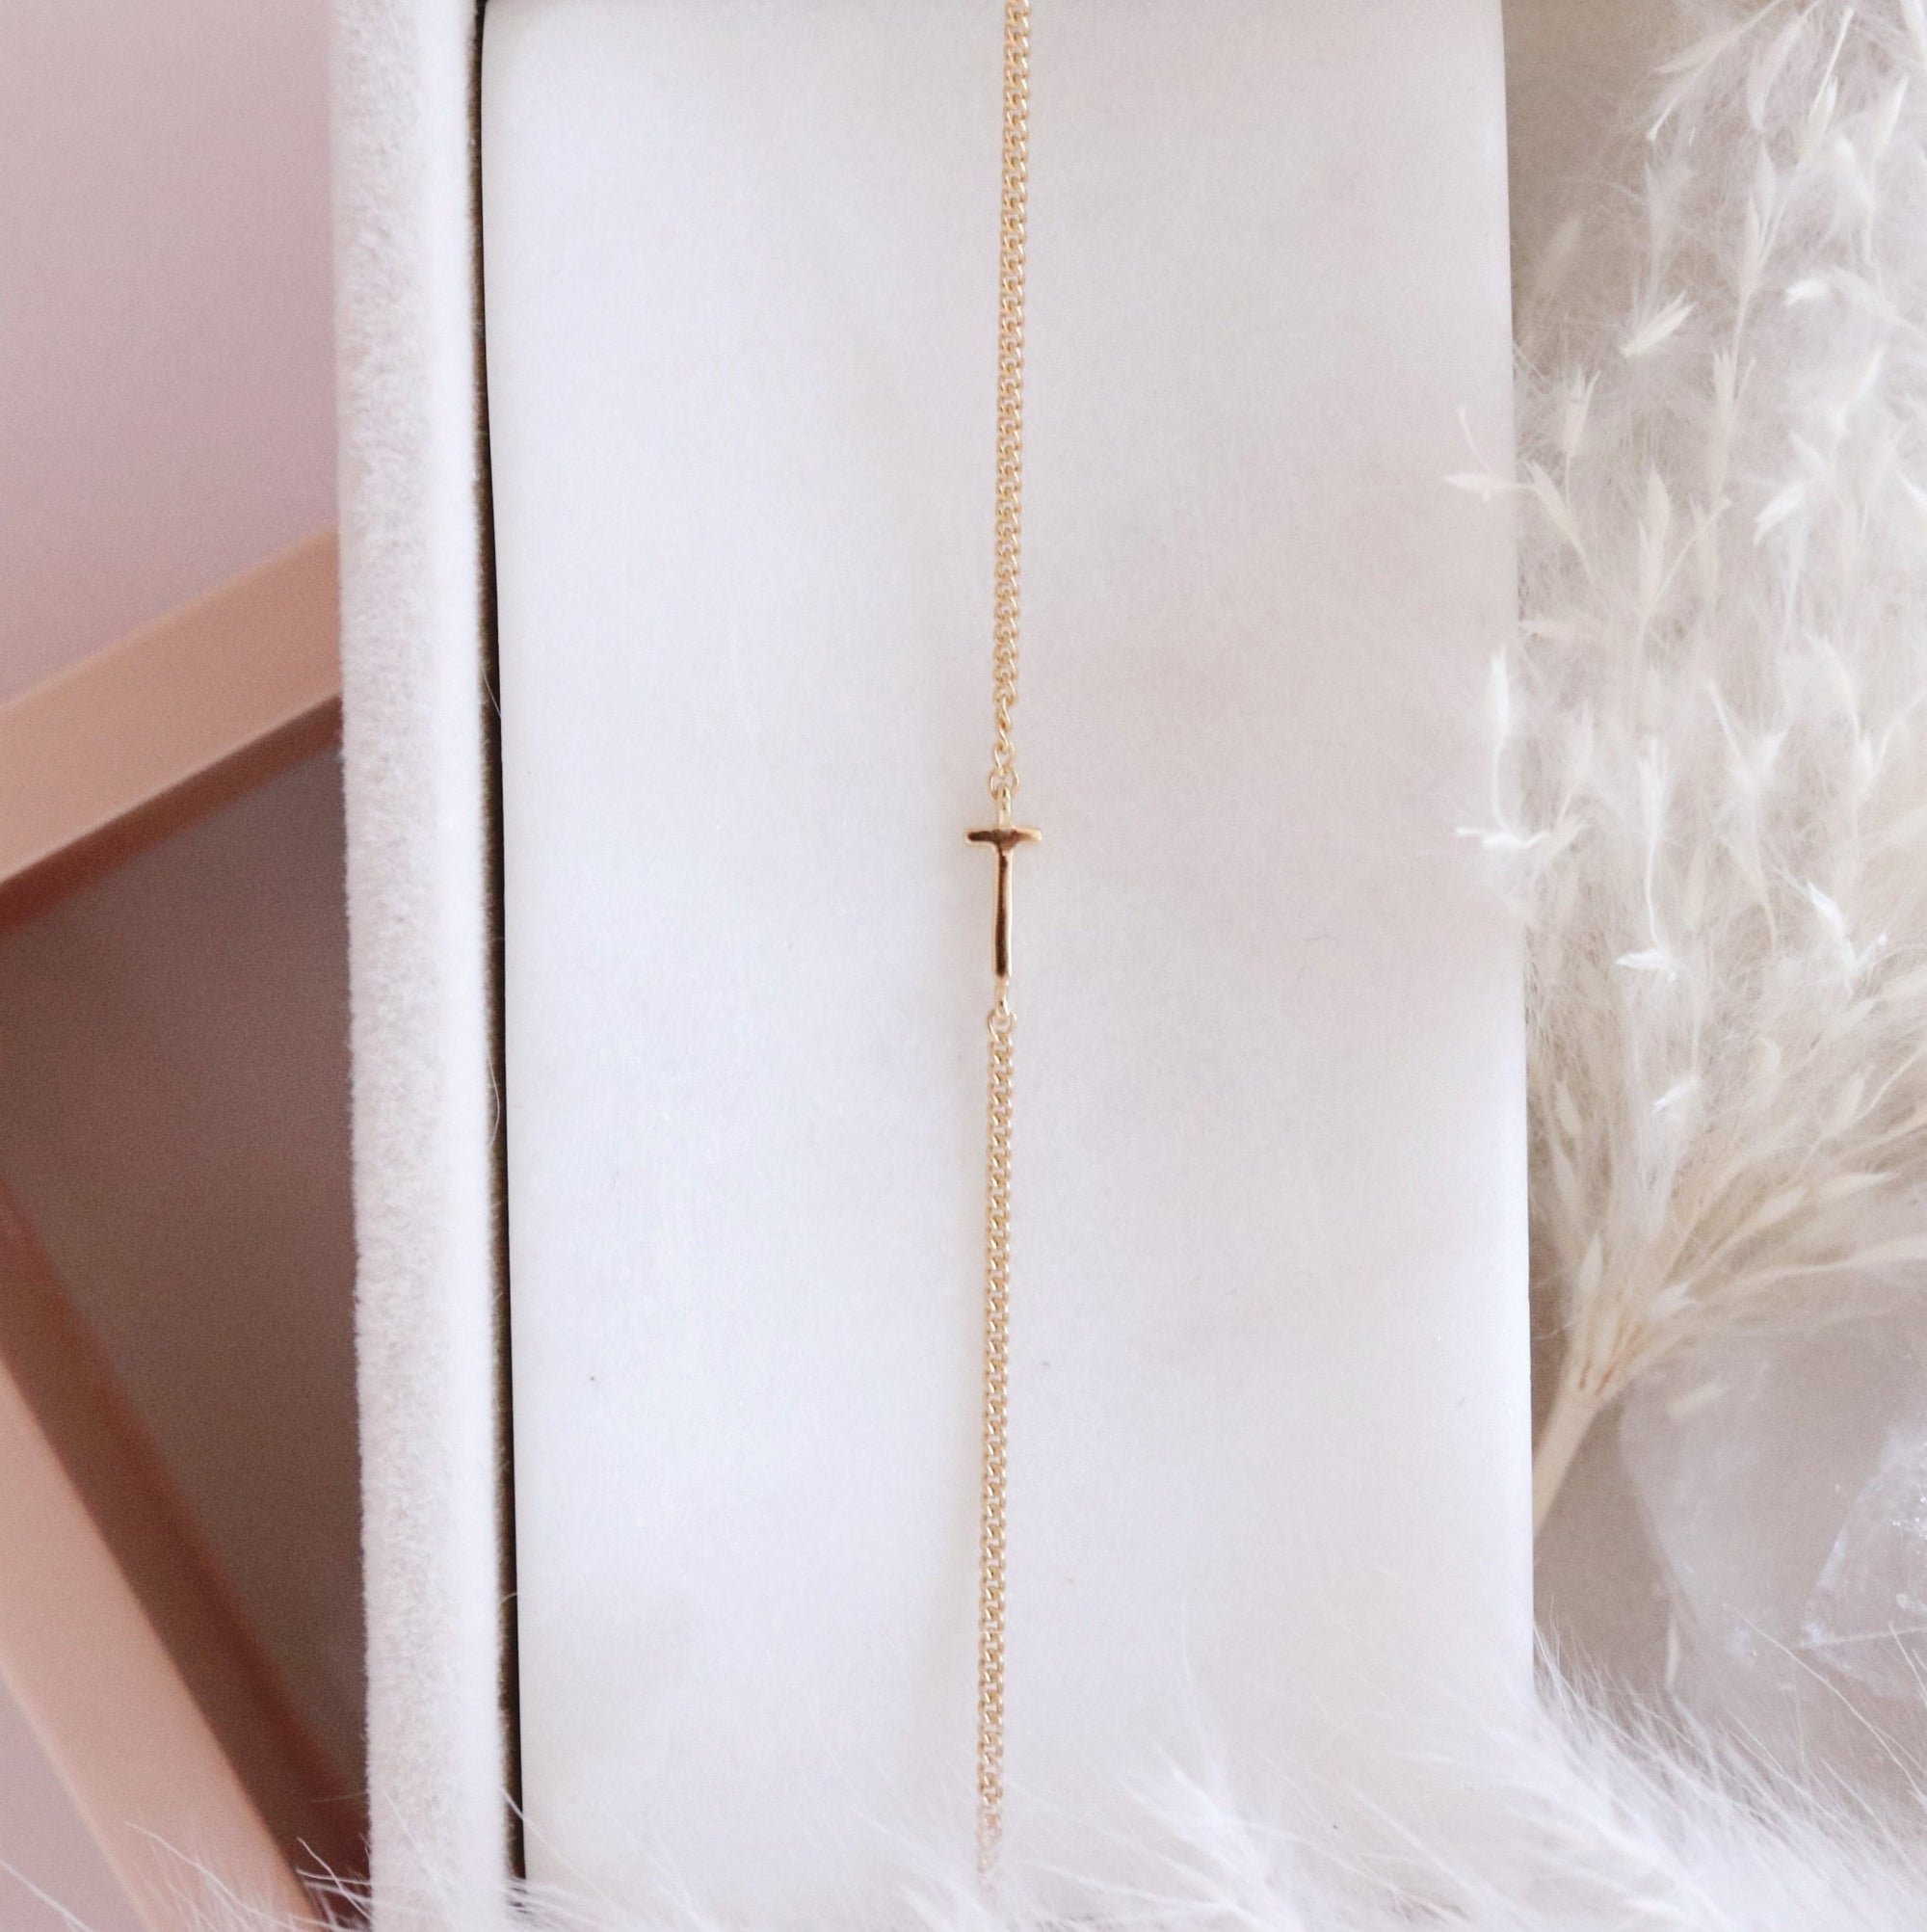 NOTABLE OFFSET INITIAL NECKLACE - T - GOLD - SO PRETTY CARA COTTER